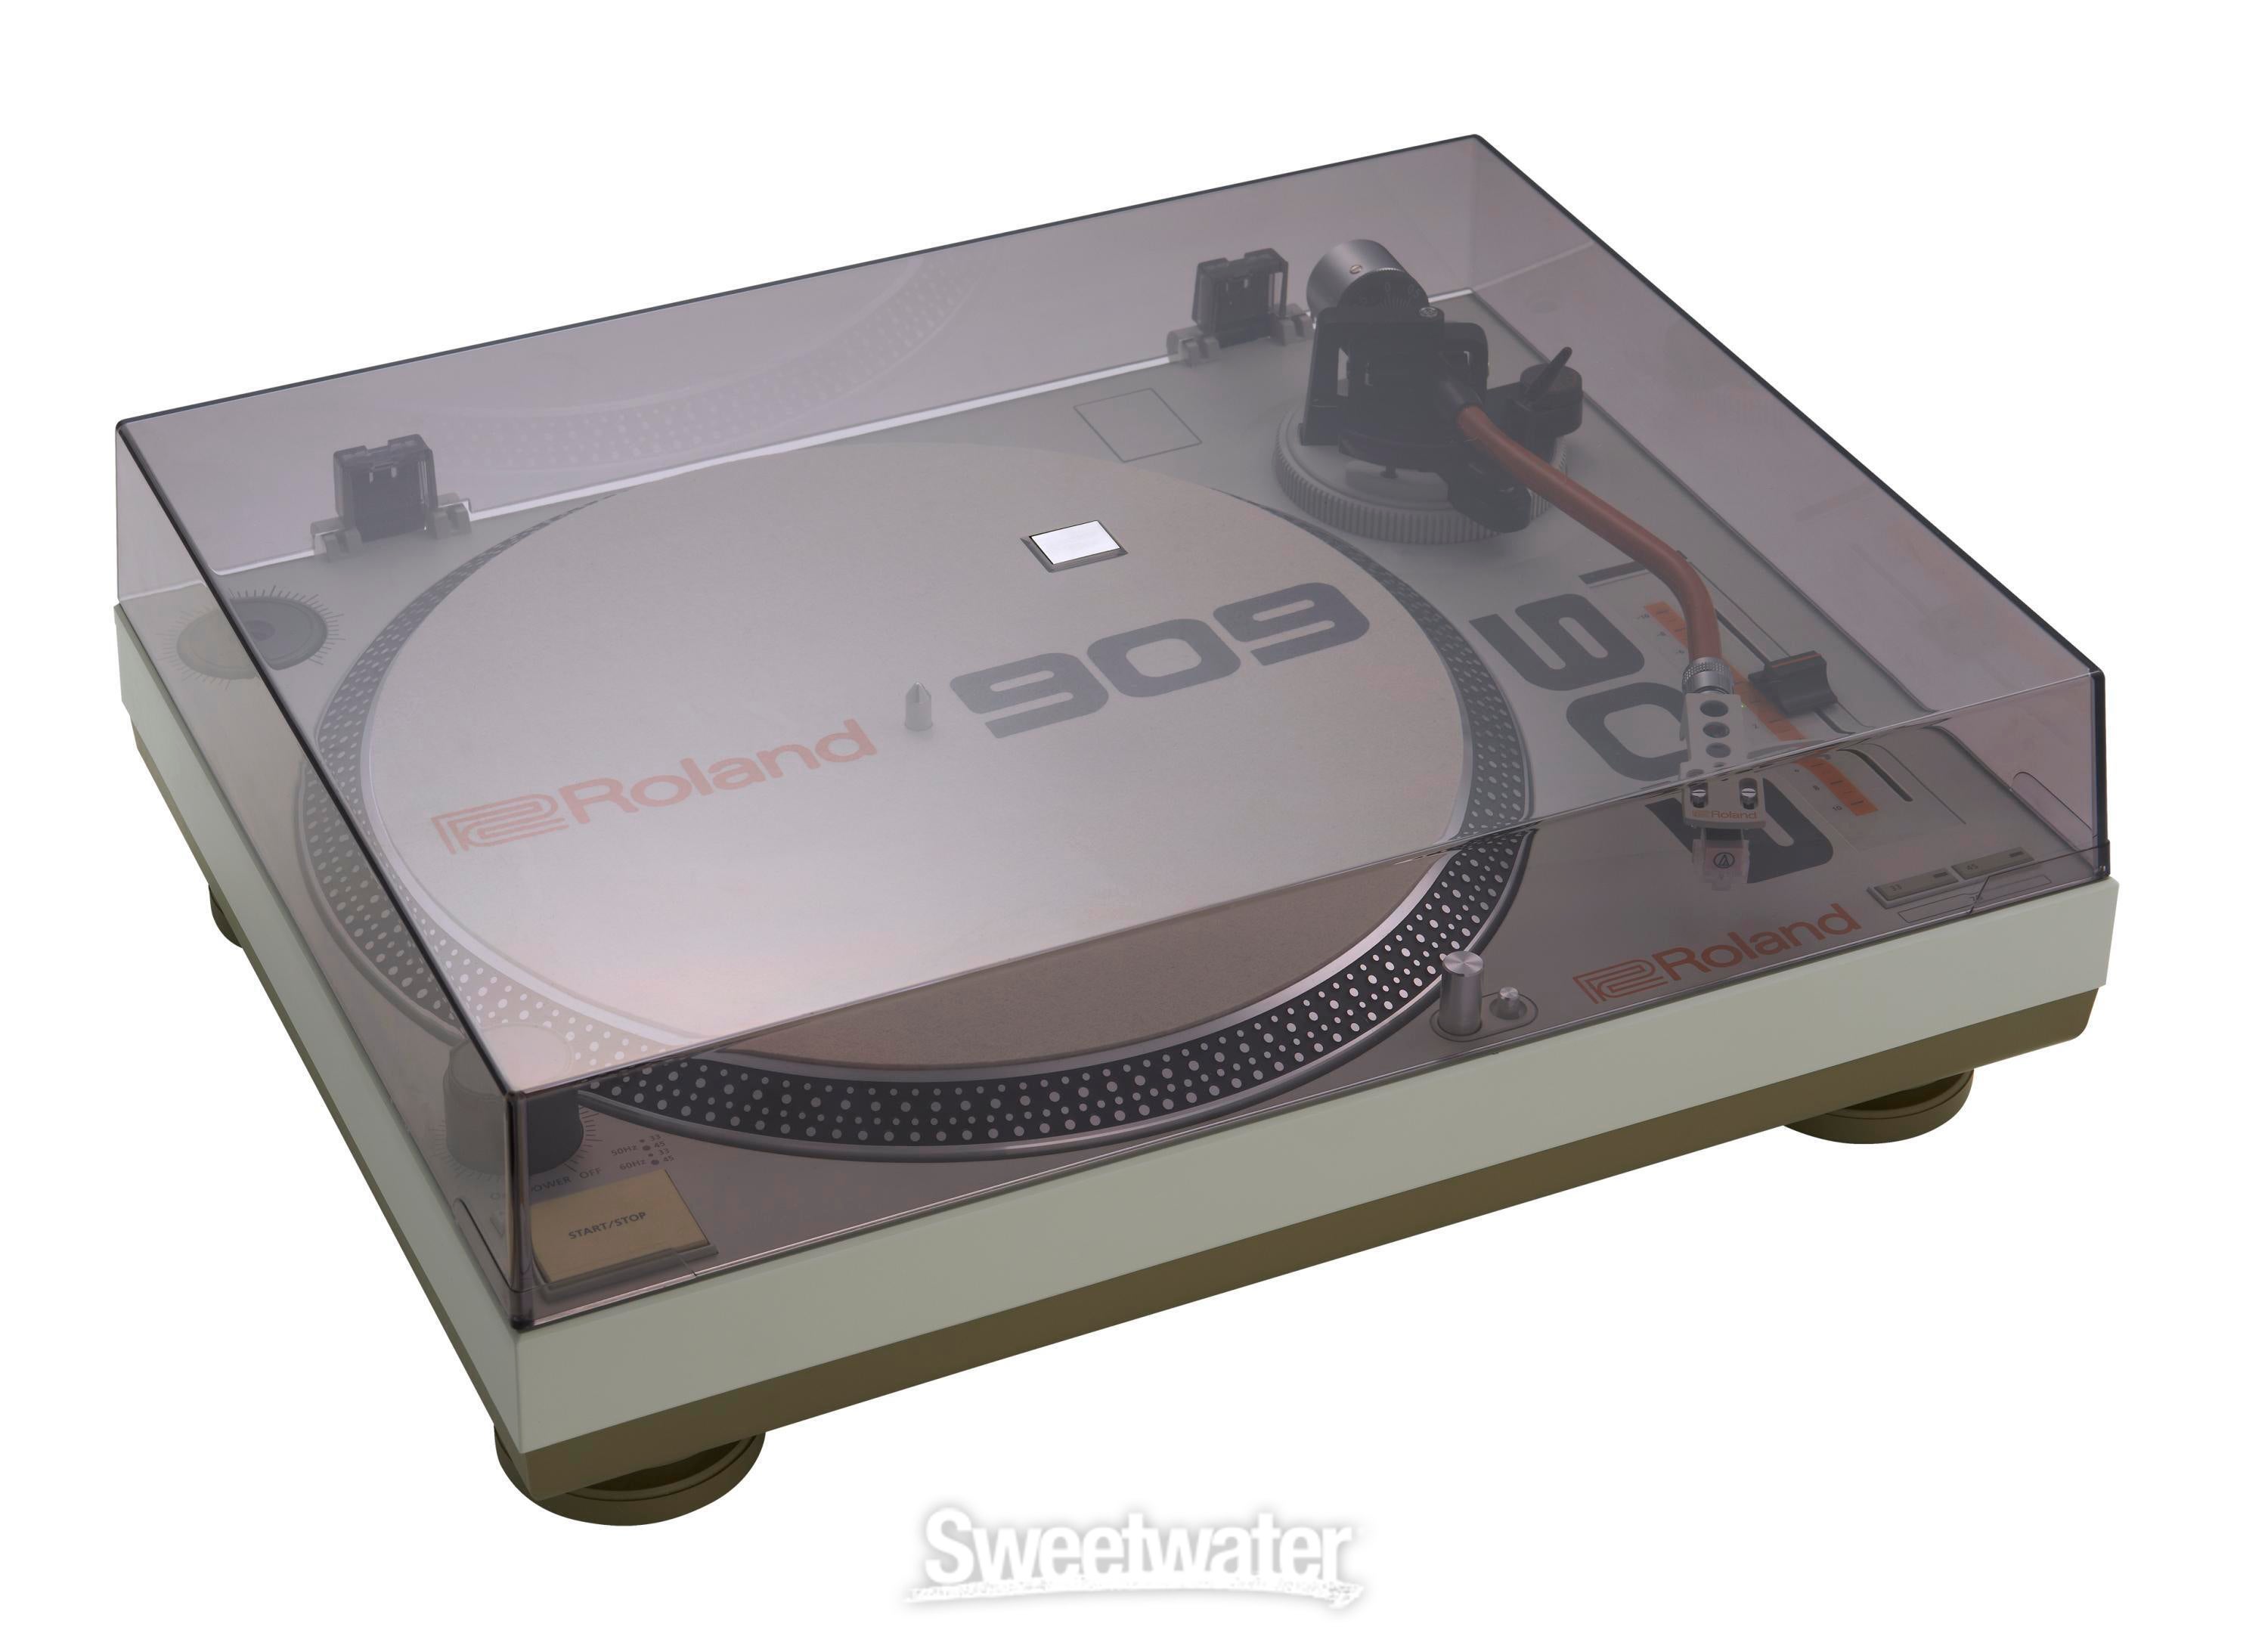 Roland TT-99 Direct-drive Turntable | Sweetwater